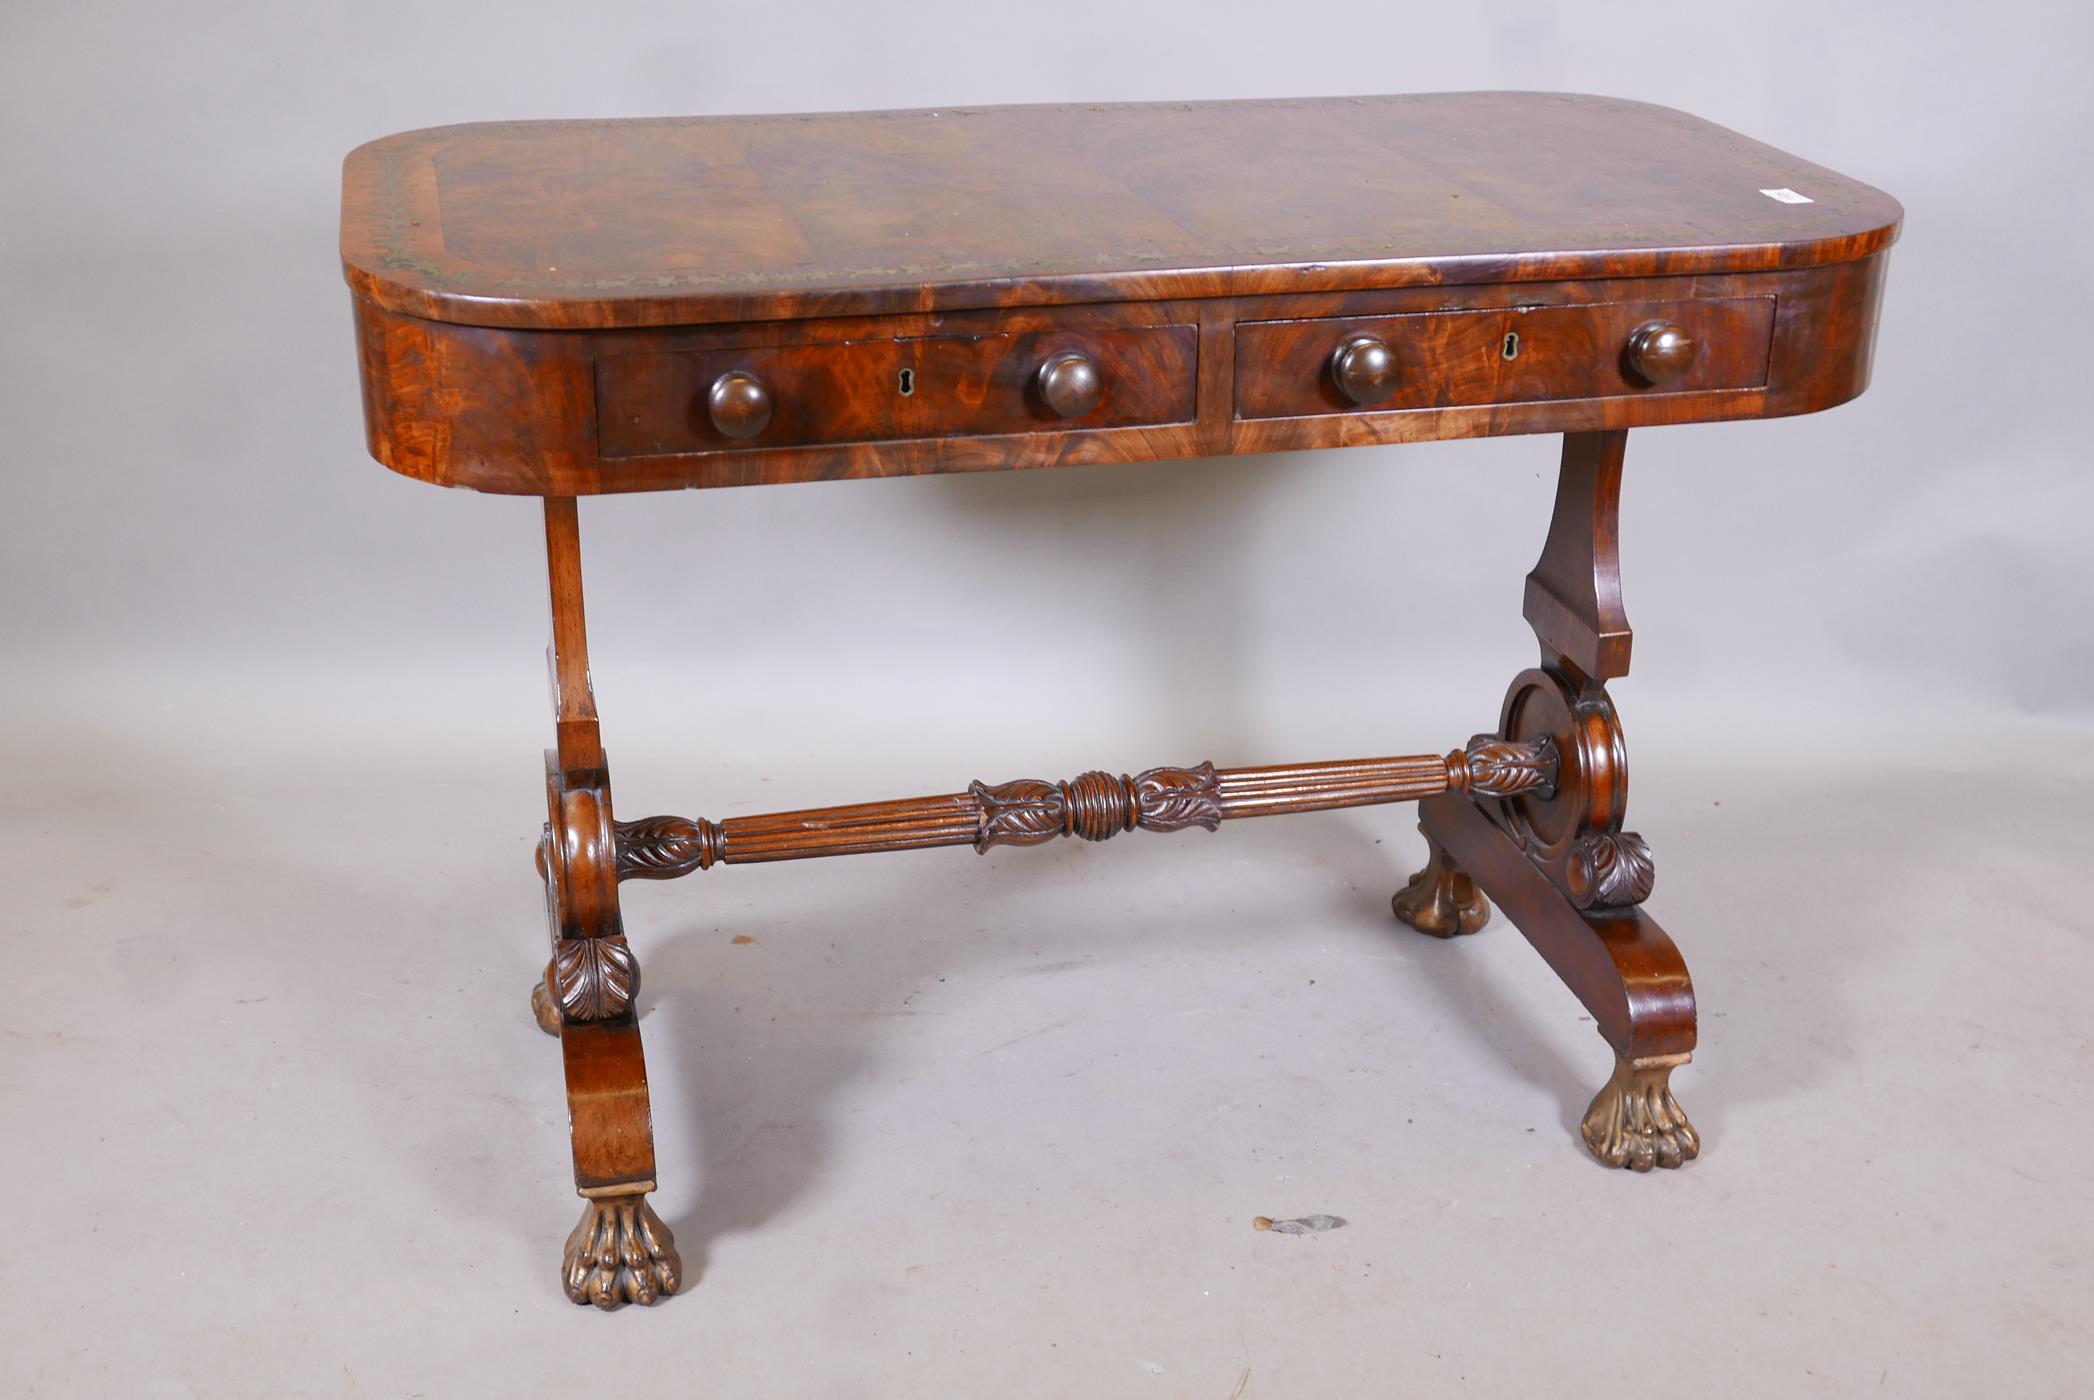 A C19th flame mahogany centre table, with two true and two false drawers, the top with rosewood